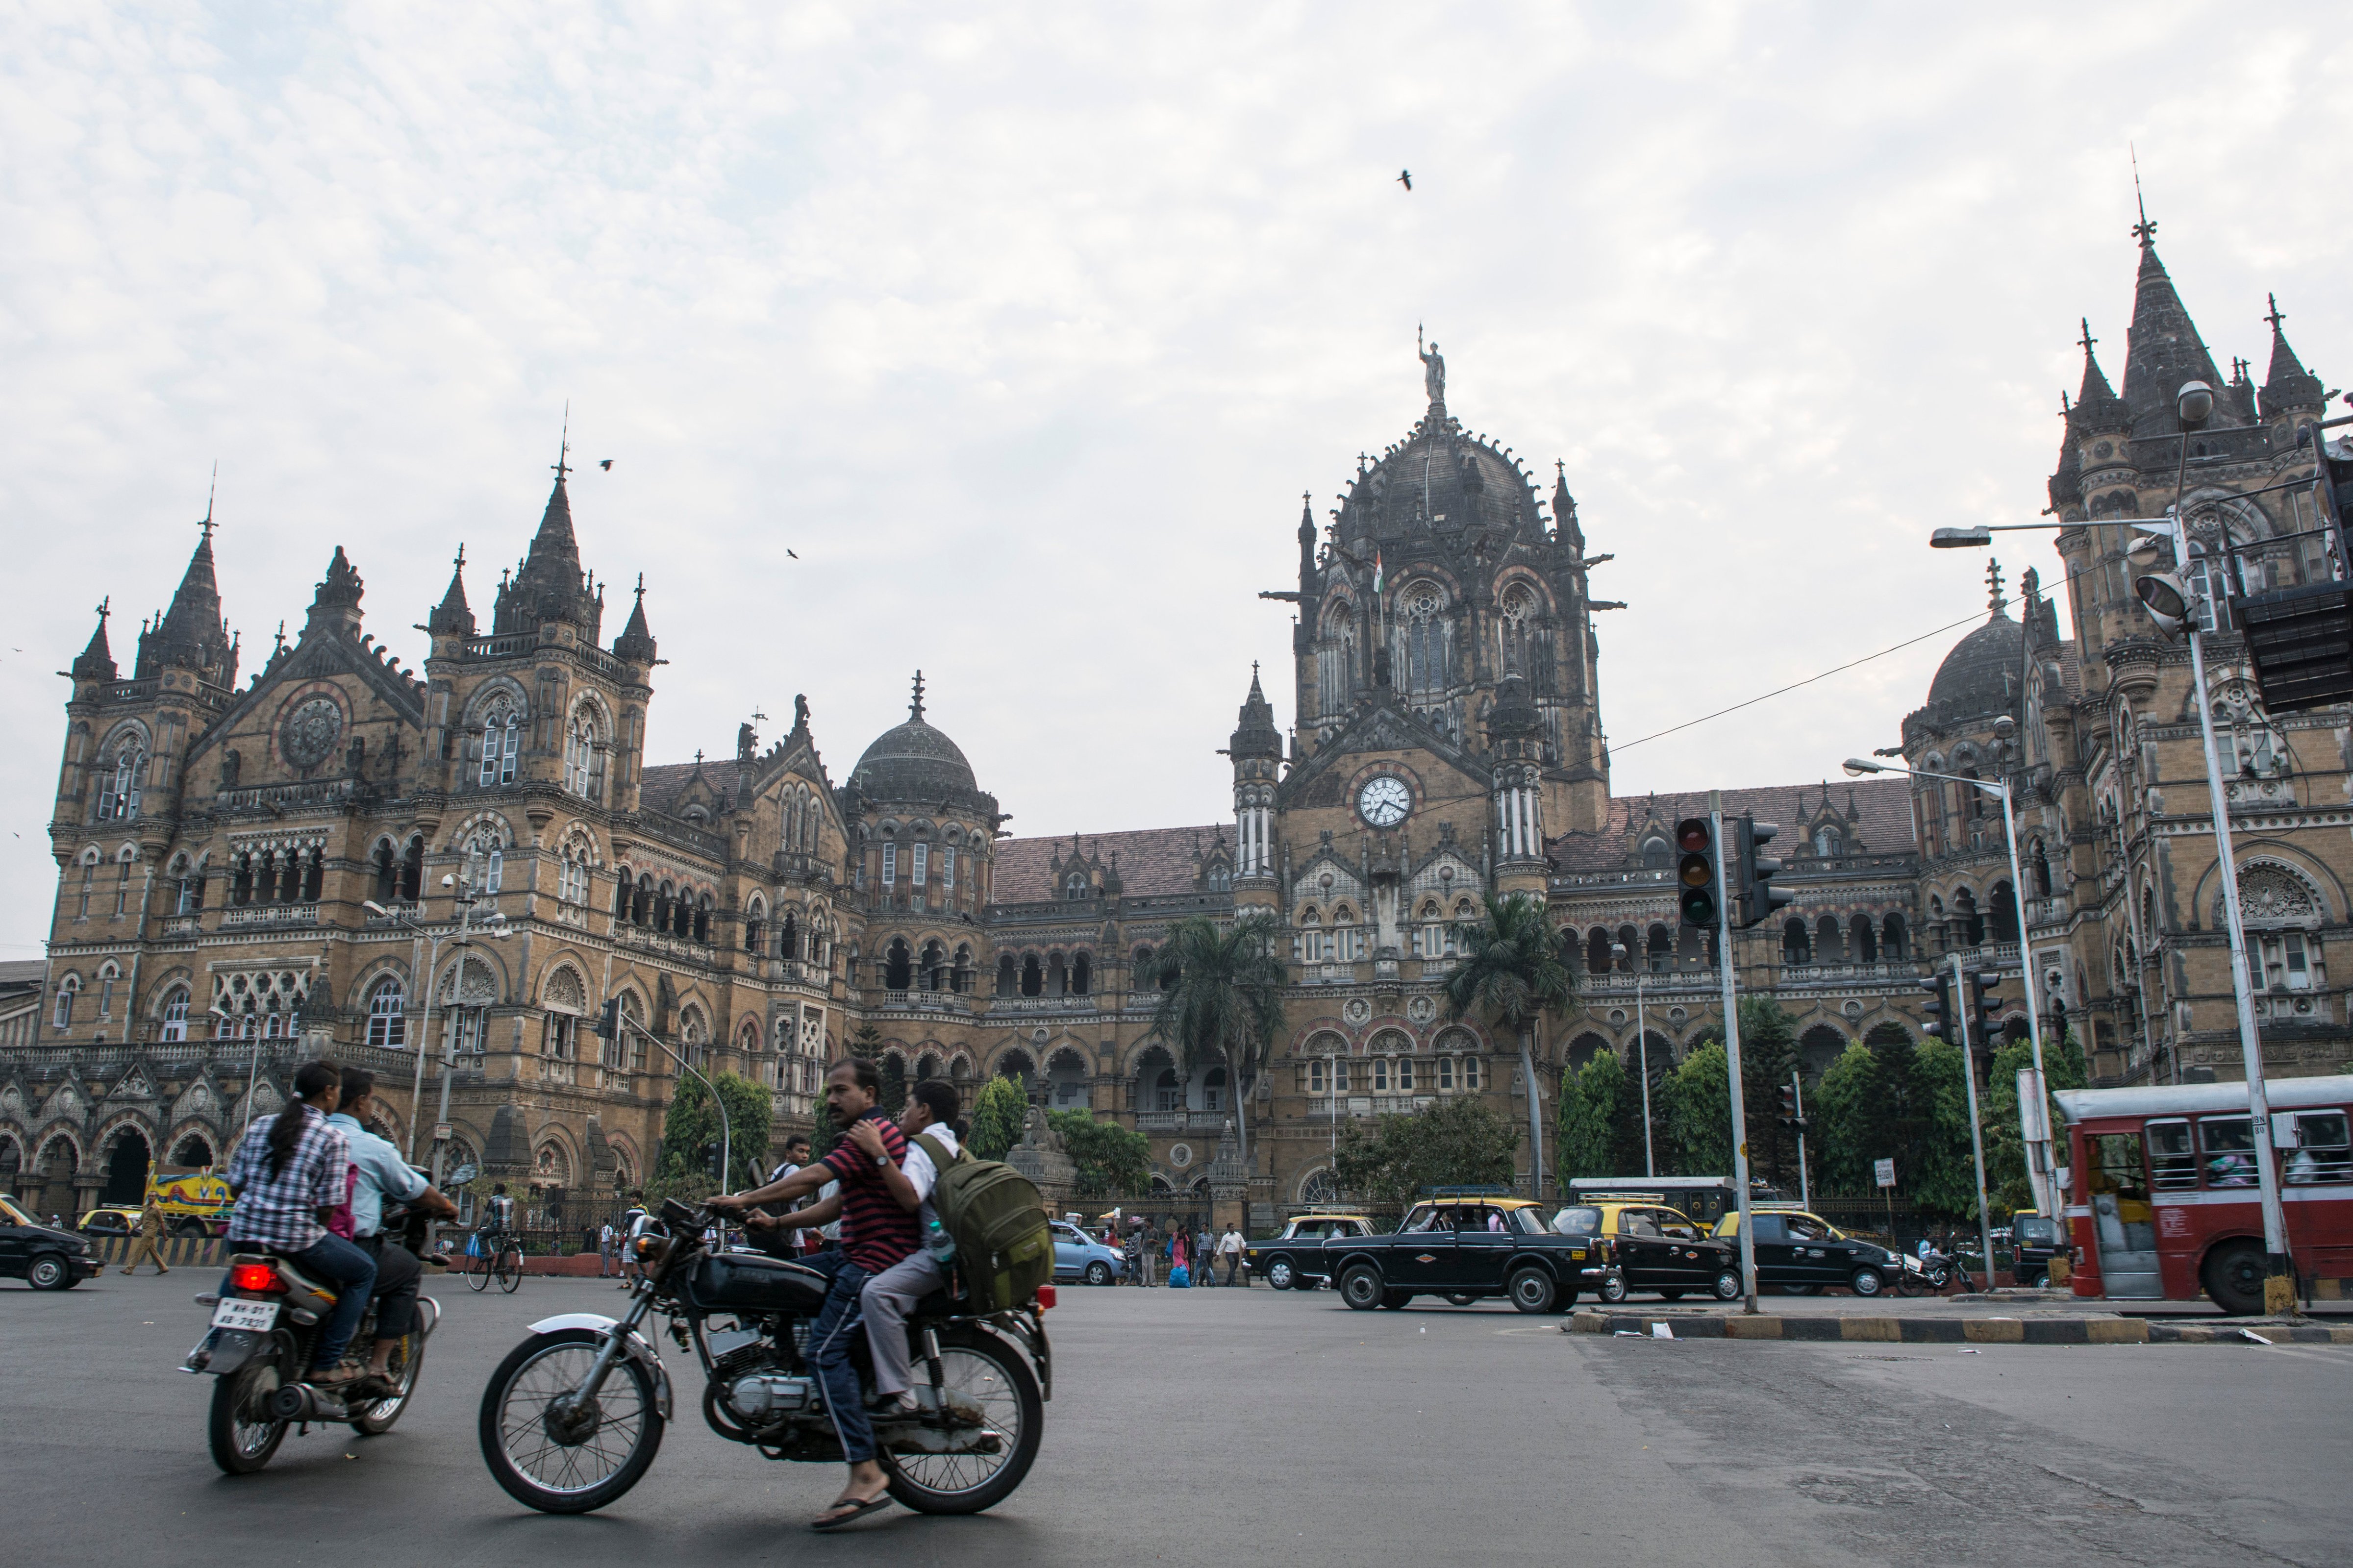 The Mumbai central railway station, today named Chhatrapati Shivaji Terminus, is formerly known as Victoria Terminus (Thierry Falise—LightRocket/Getty Images)